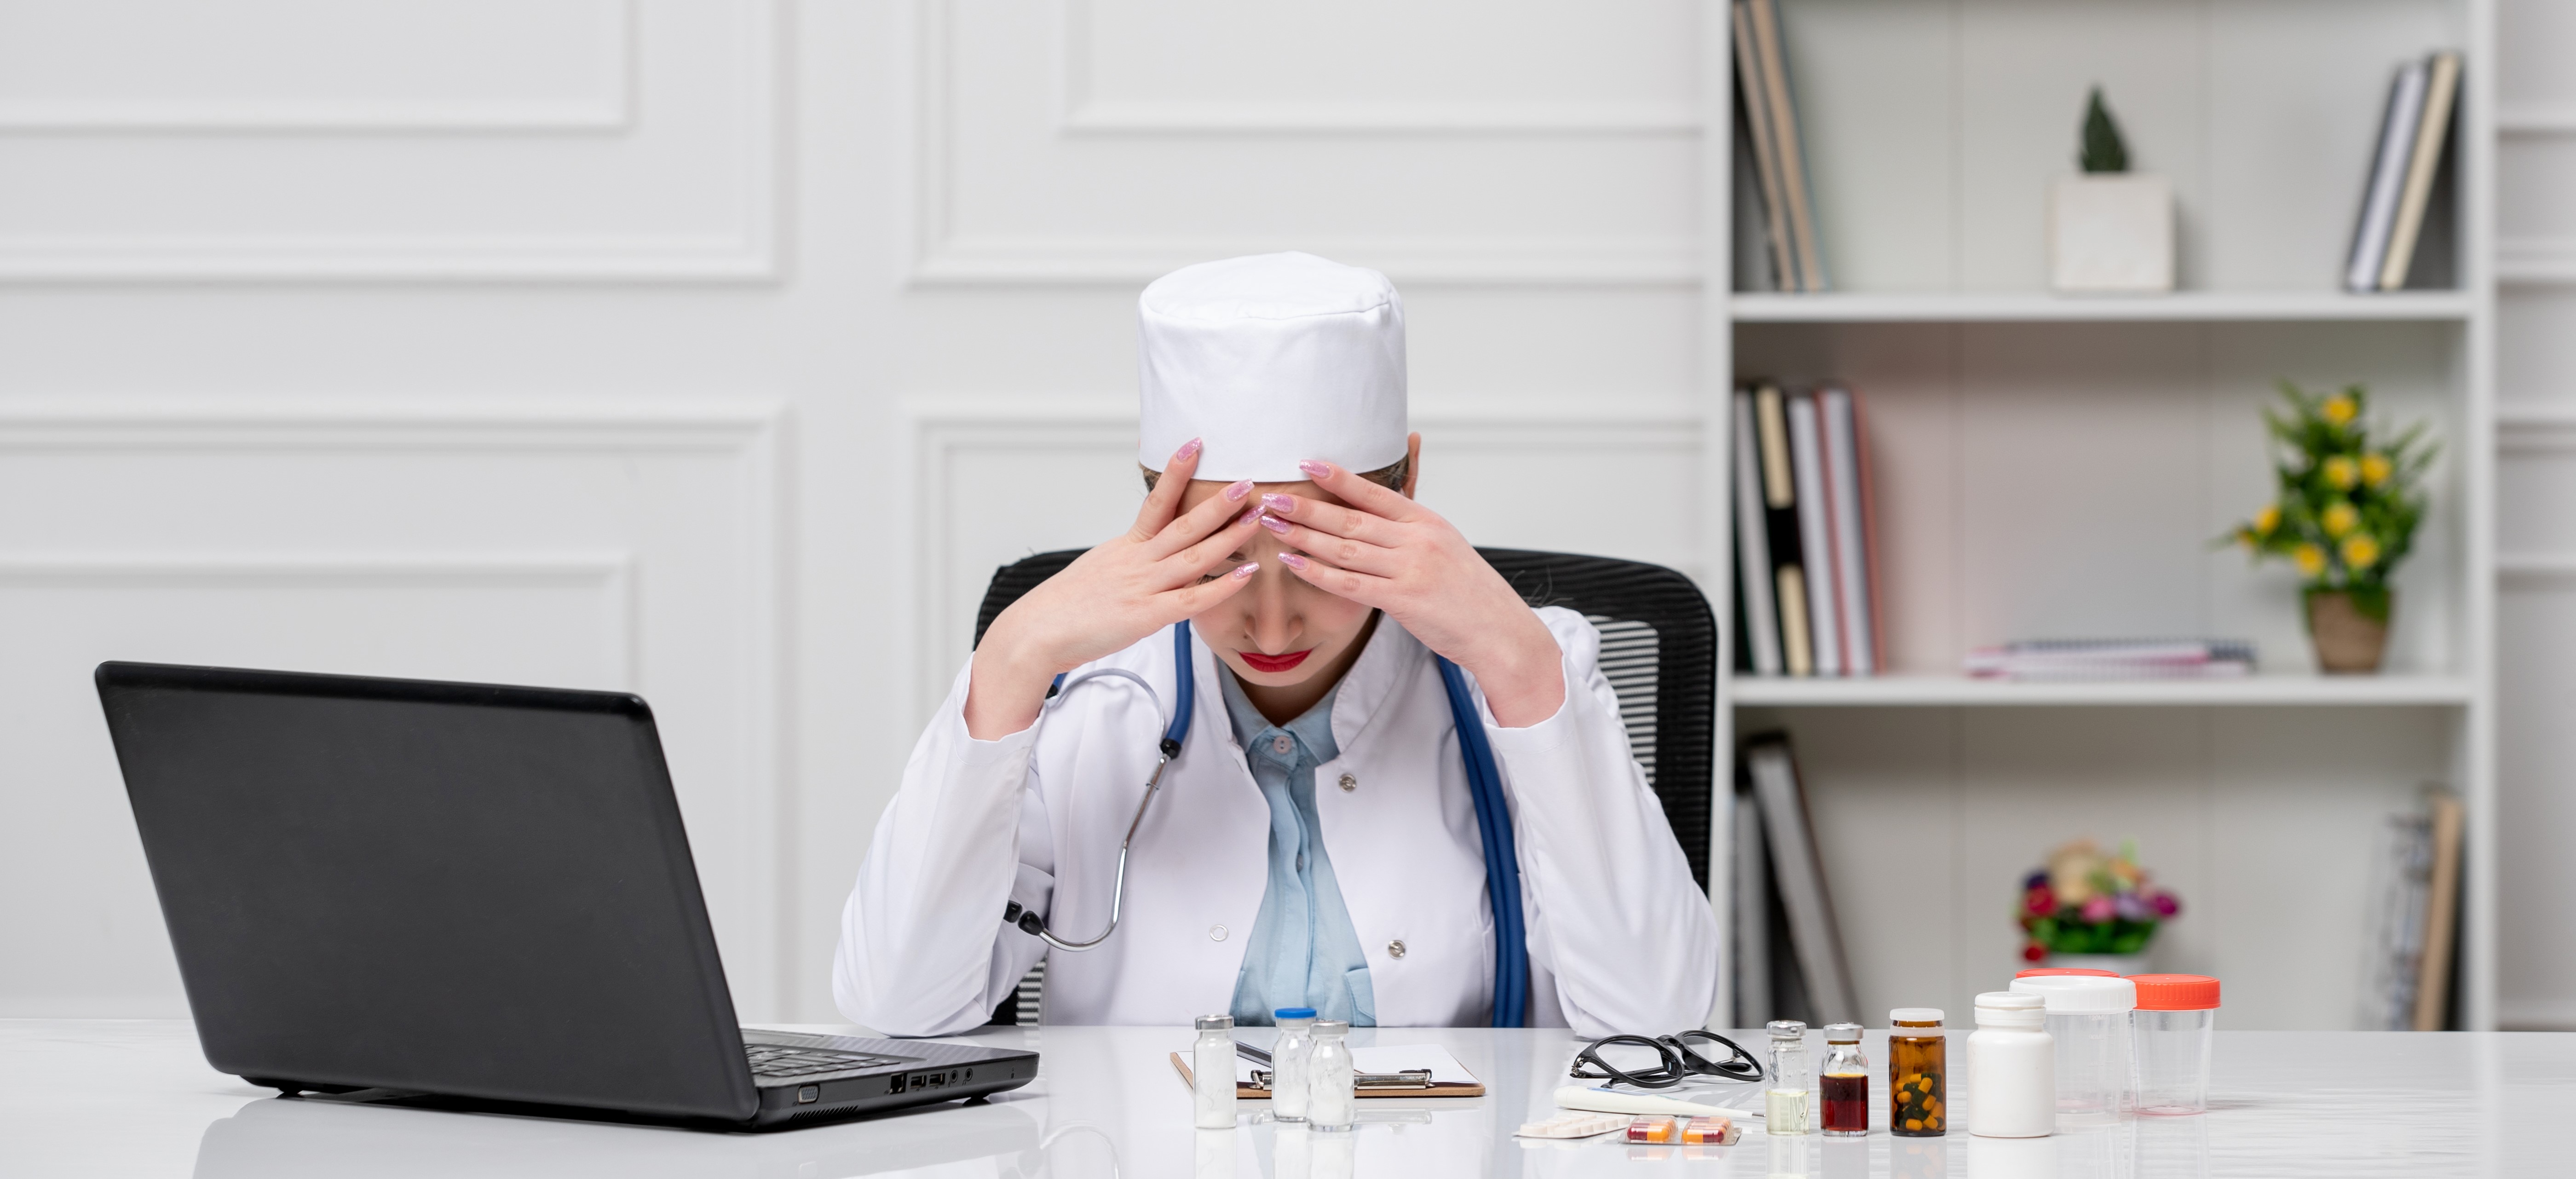 medical-beautiful-cute-doctor-white-hospital-coat-hat-with-computer-holding-head-2.jpg